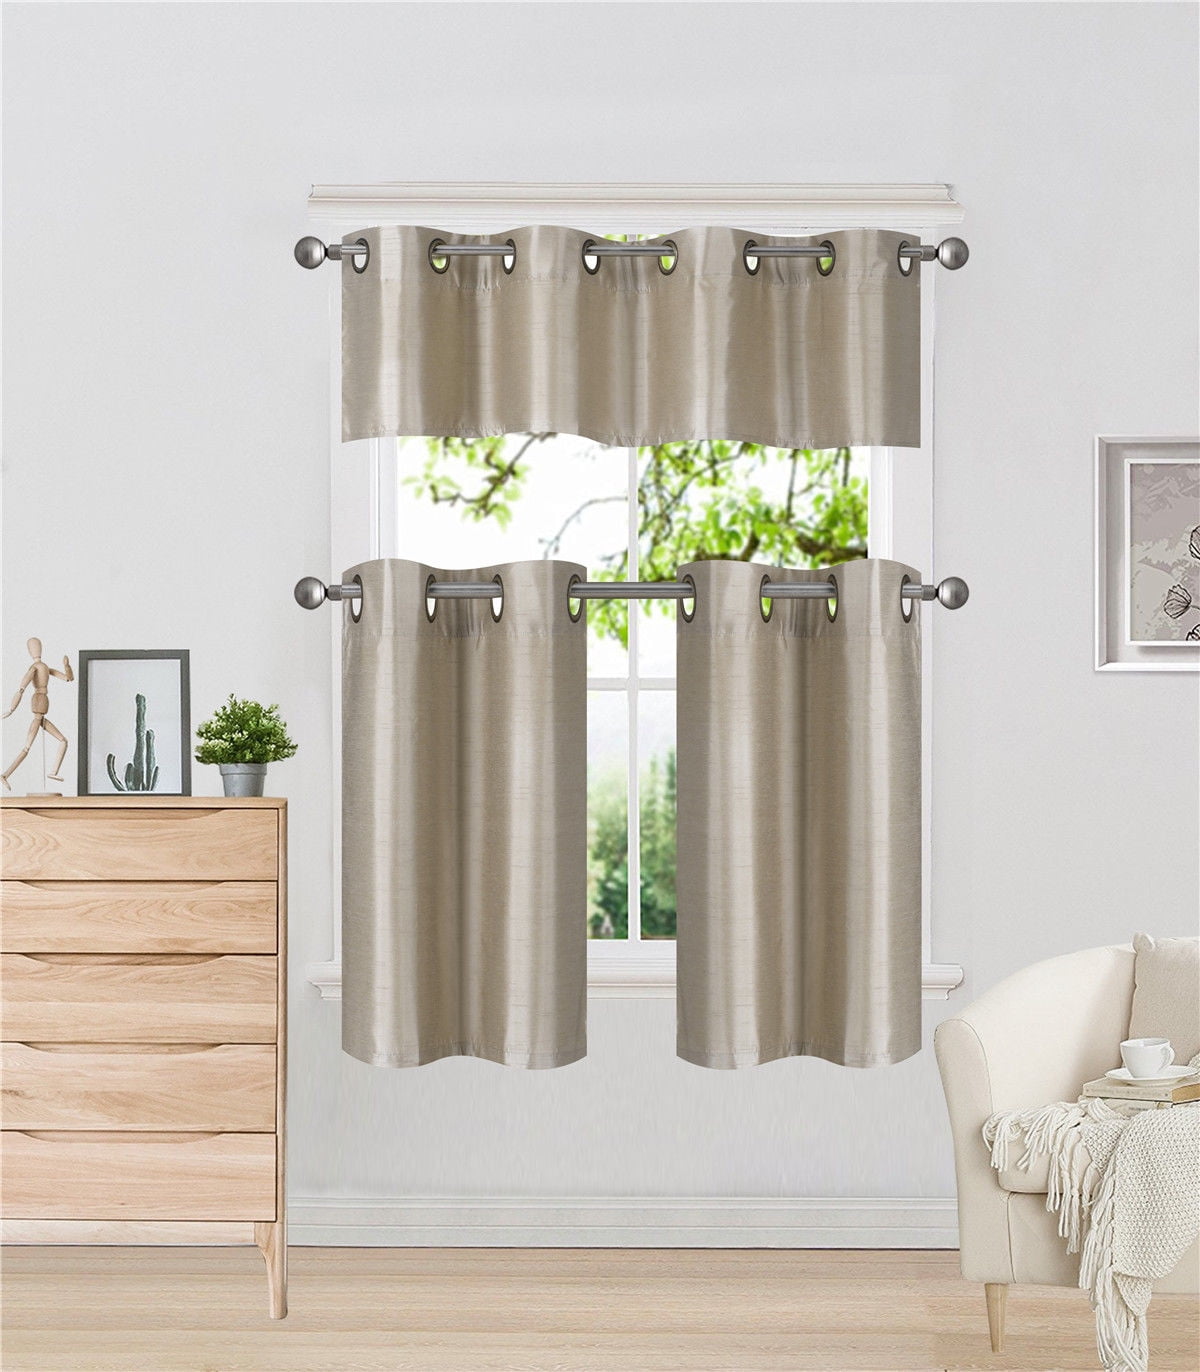 Blackout Thermal Insulated Valance Curtain ï¼ˆ52 W x 18 Hï¼‰ Short Kitchen Curtain Small Cabinet Curtains LIOOBO Window Curtain Valance 